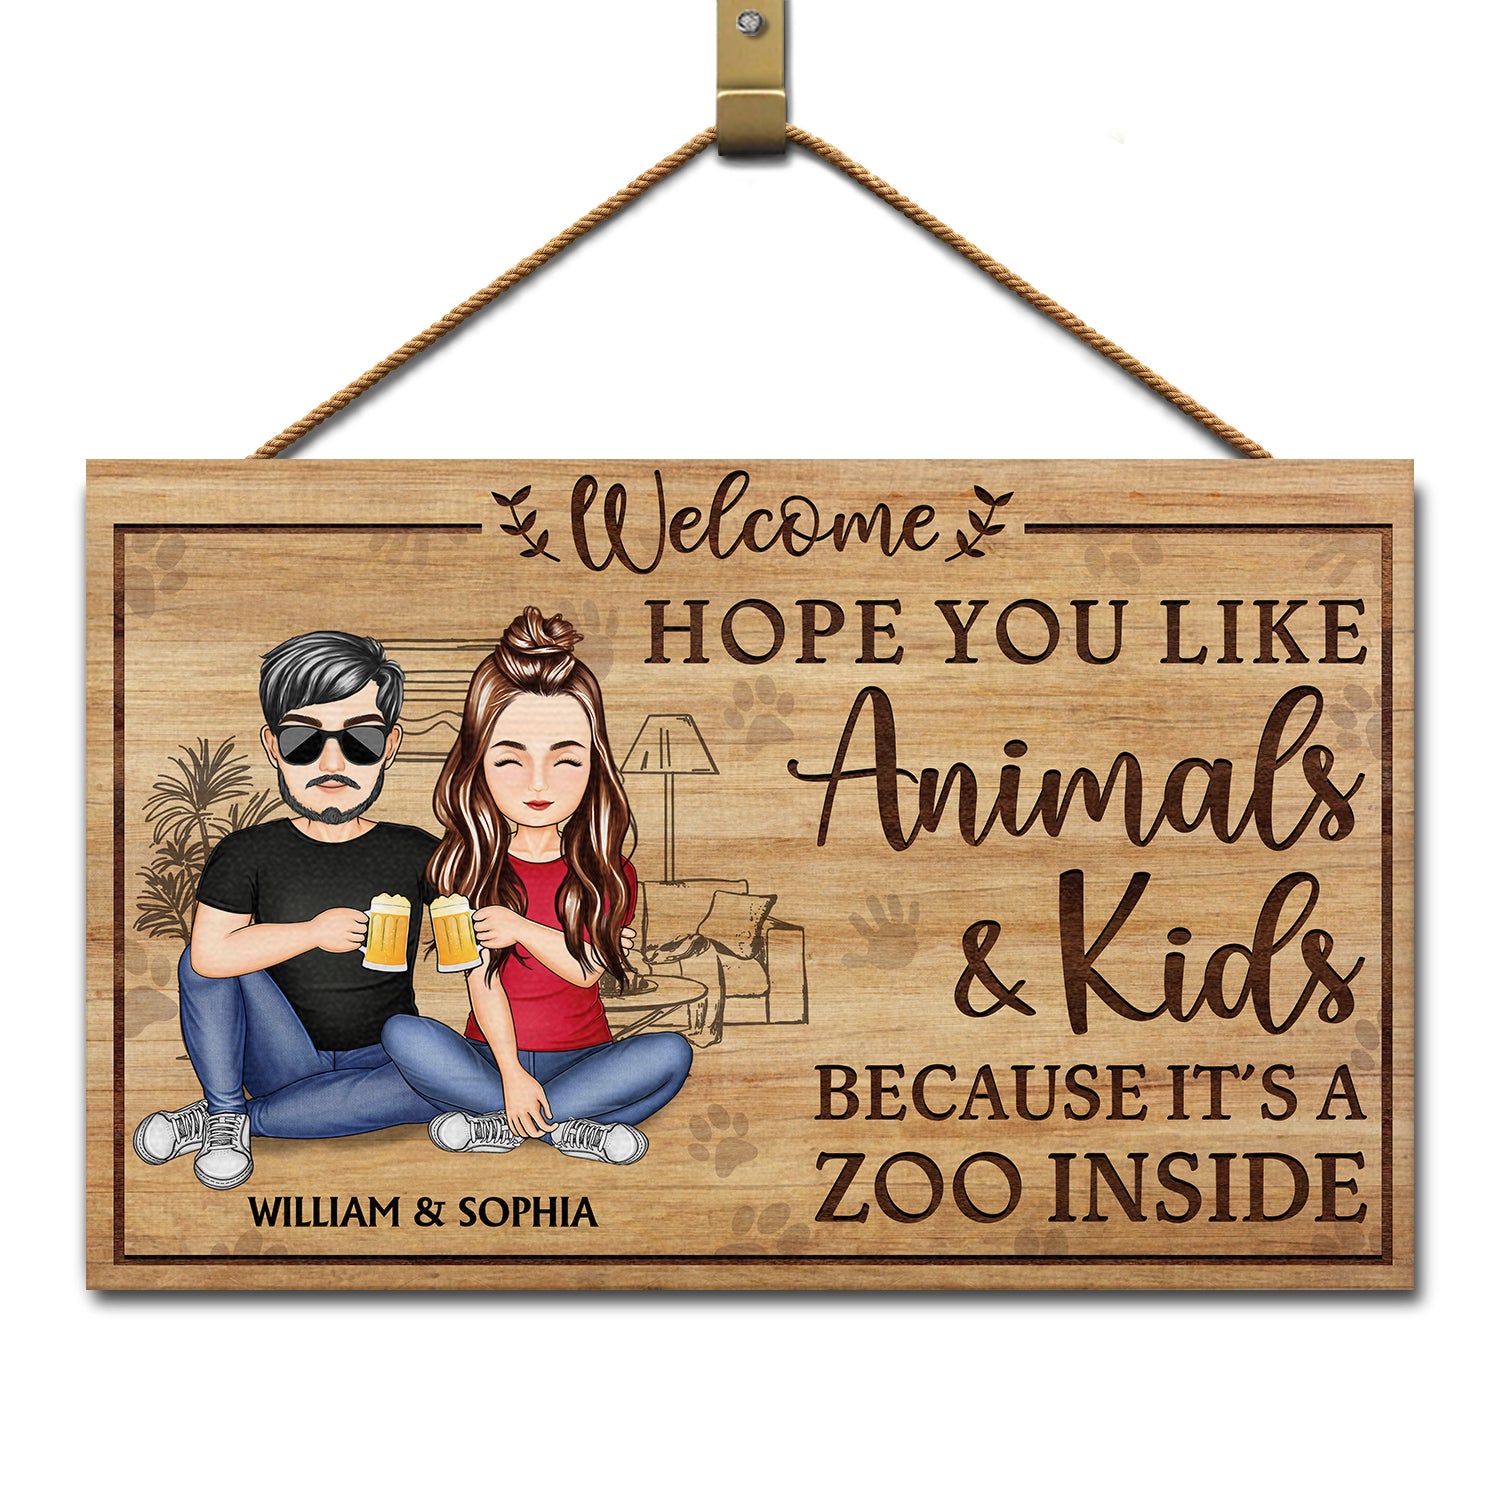 Hope You Like Animals And Kids - Anniversary, Birthday, Home Decor Gift For Spouse, Lover, Husband, Wife, Boyfriend, Girlfriend, Couple - Personalized Custom Wood Rectangle Sign